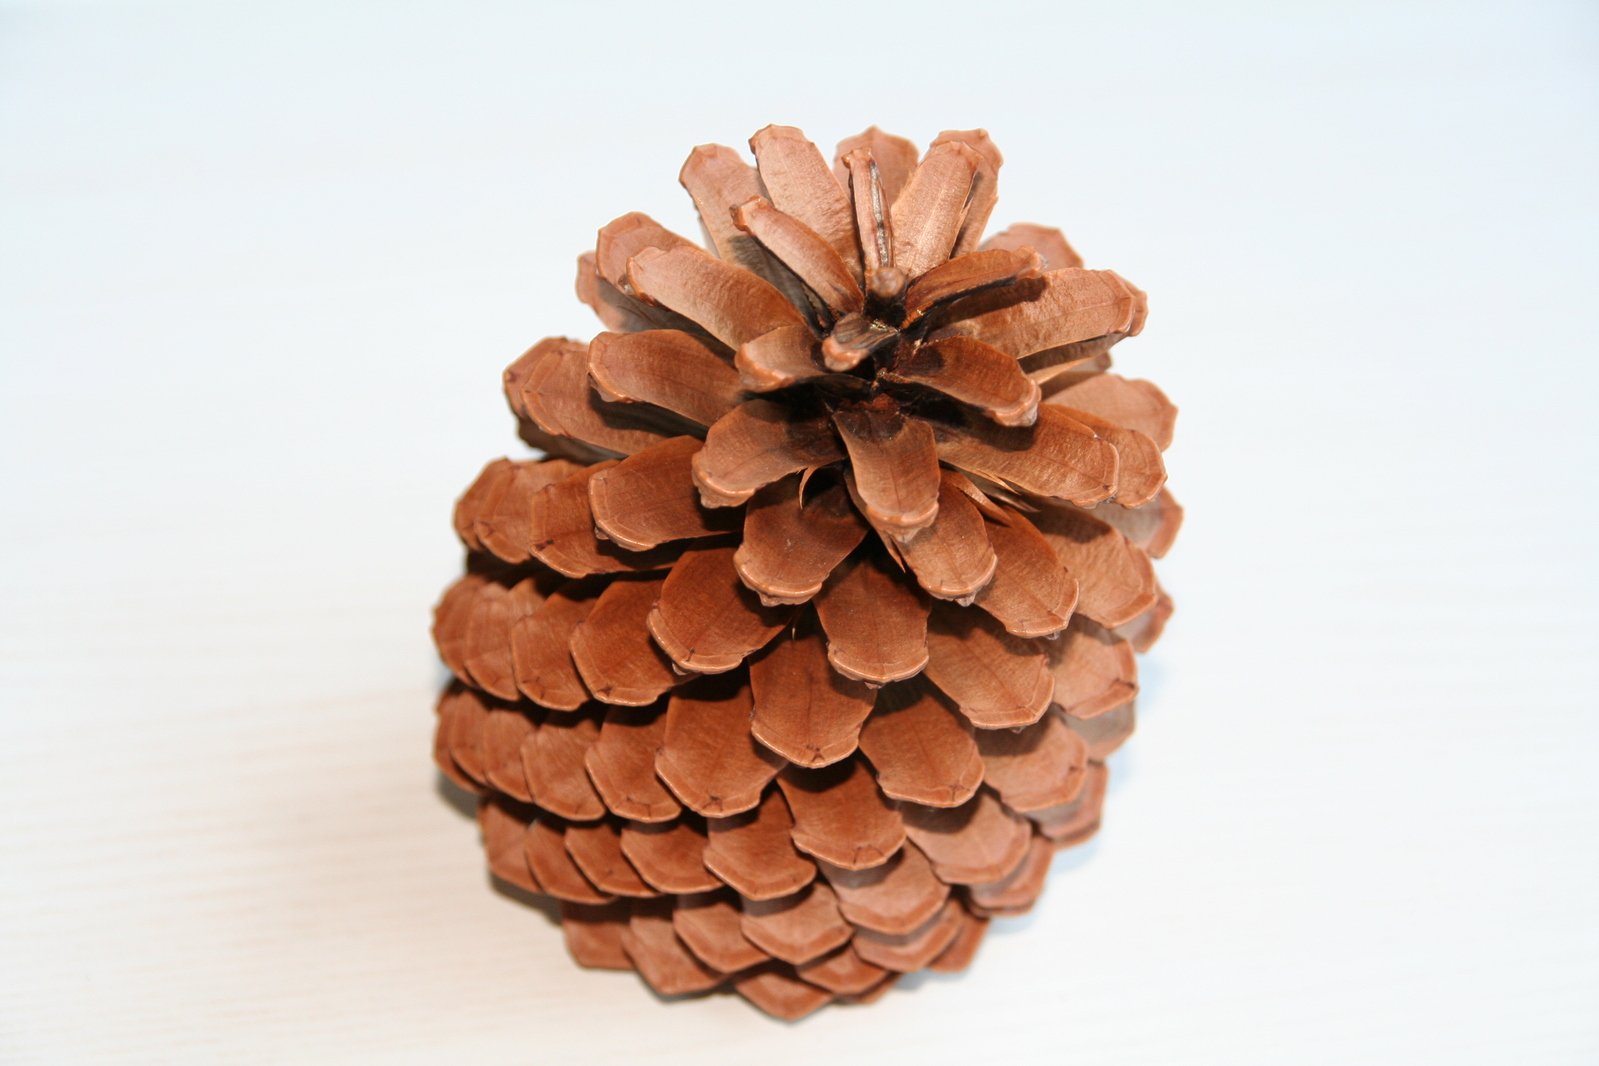 pine cone sitting on a table in a white background